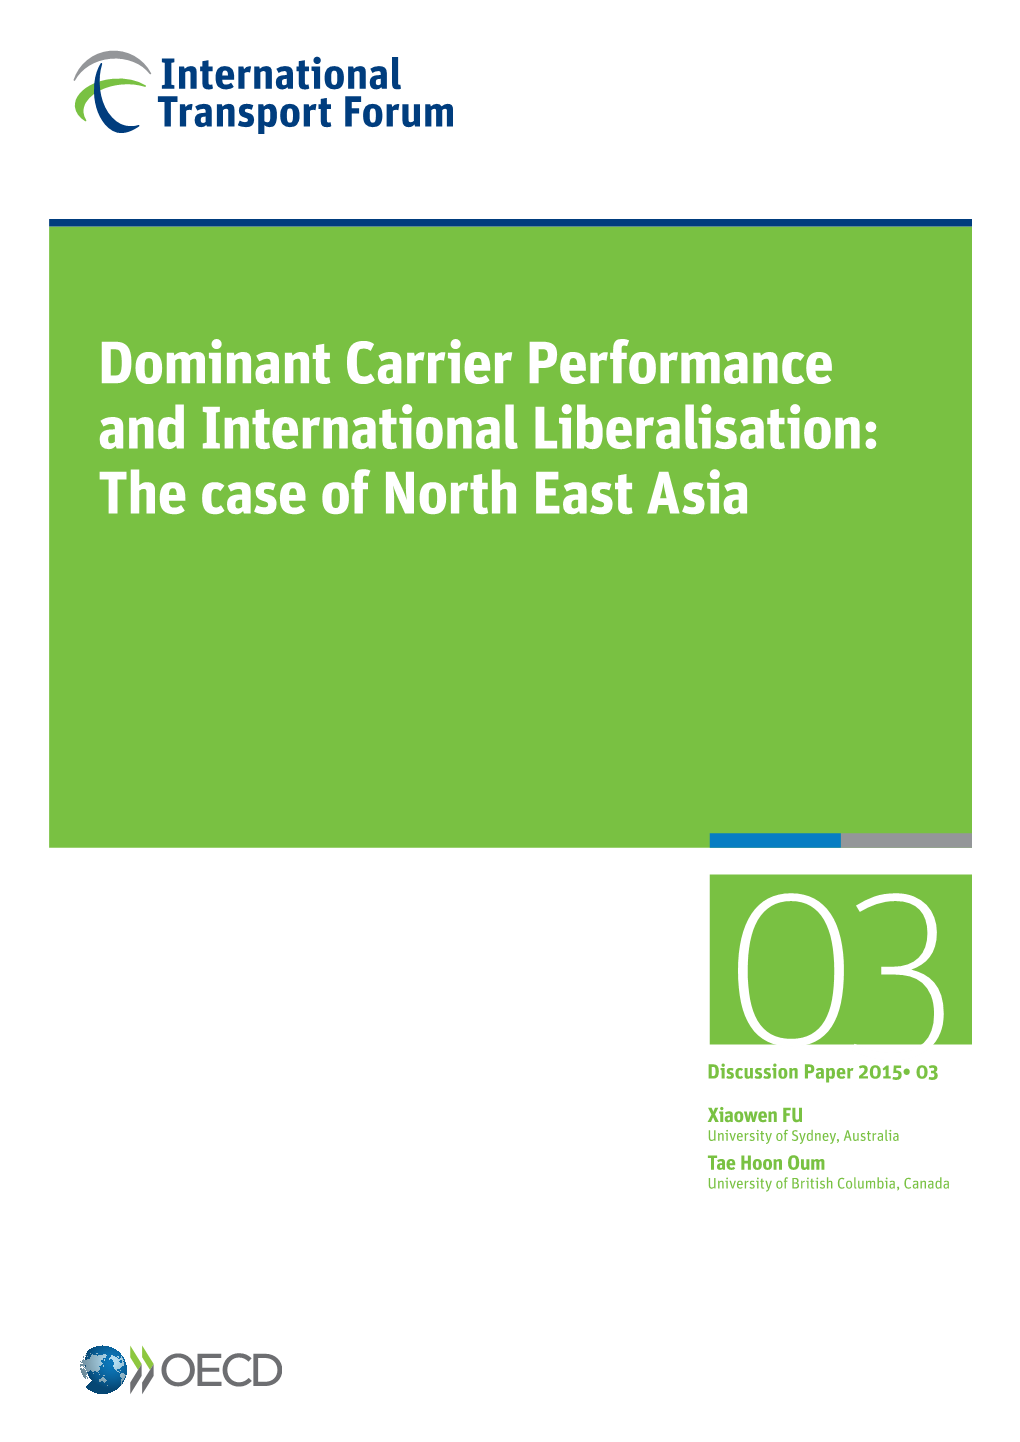 Dominant Carrier Performance and International Liberalisation: the Case of North East Asia